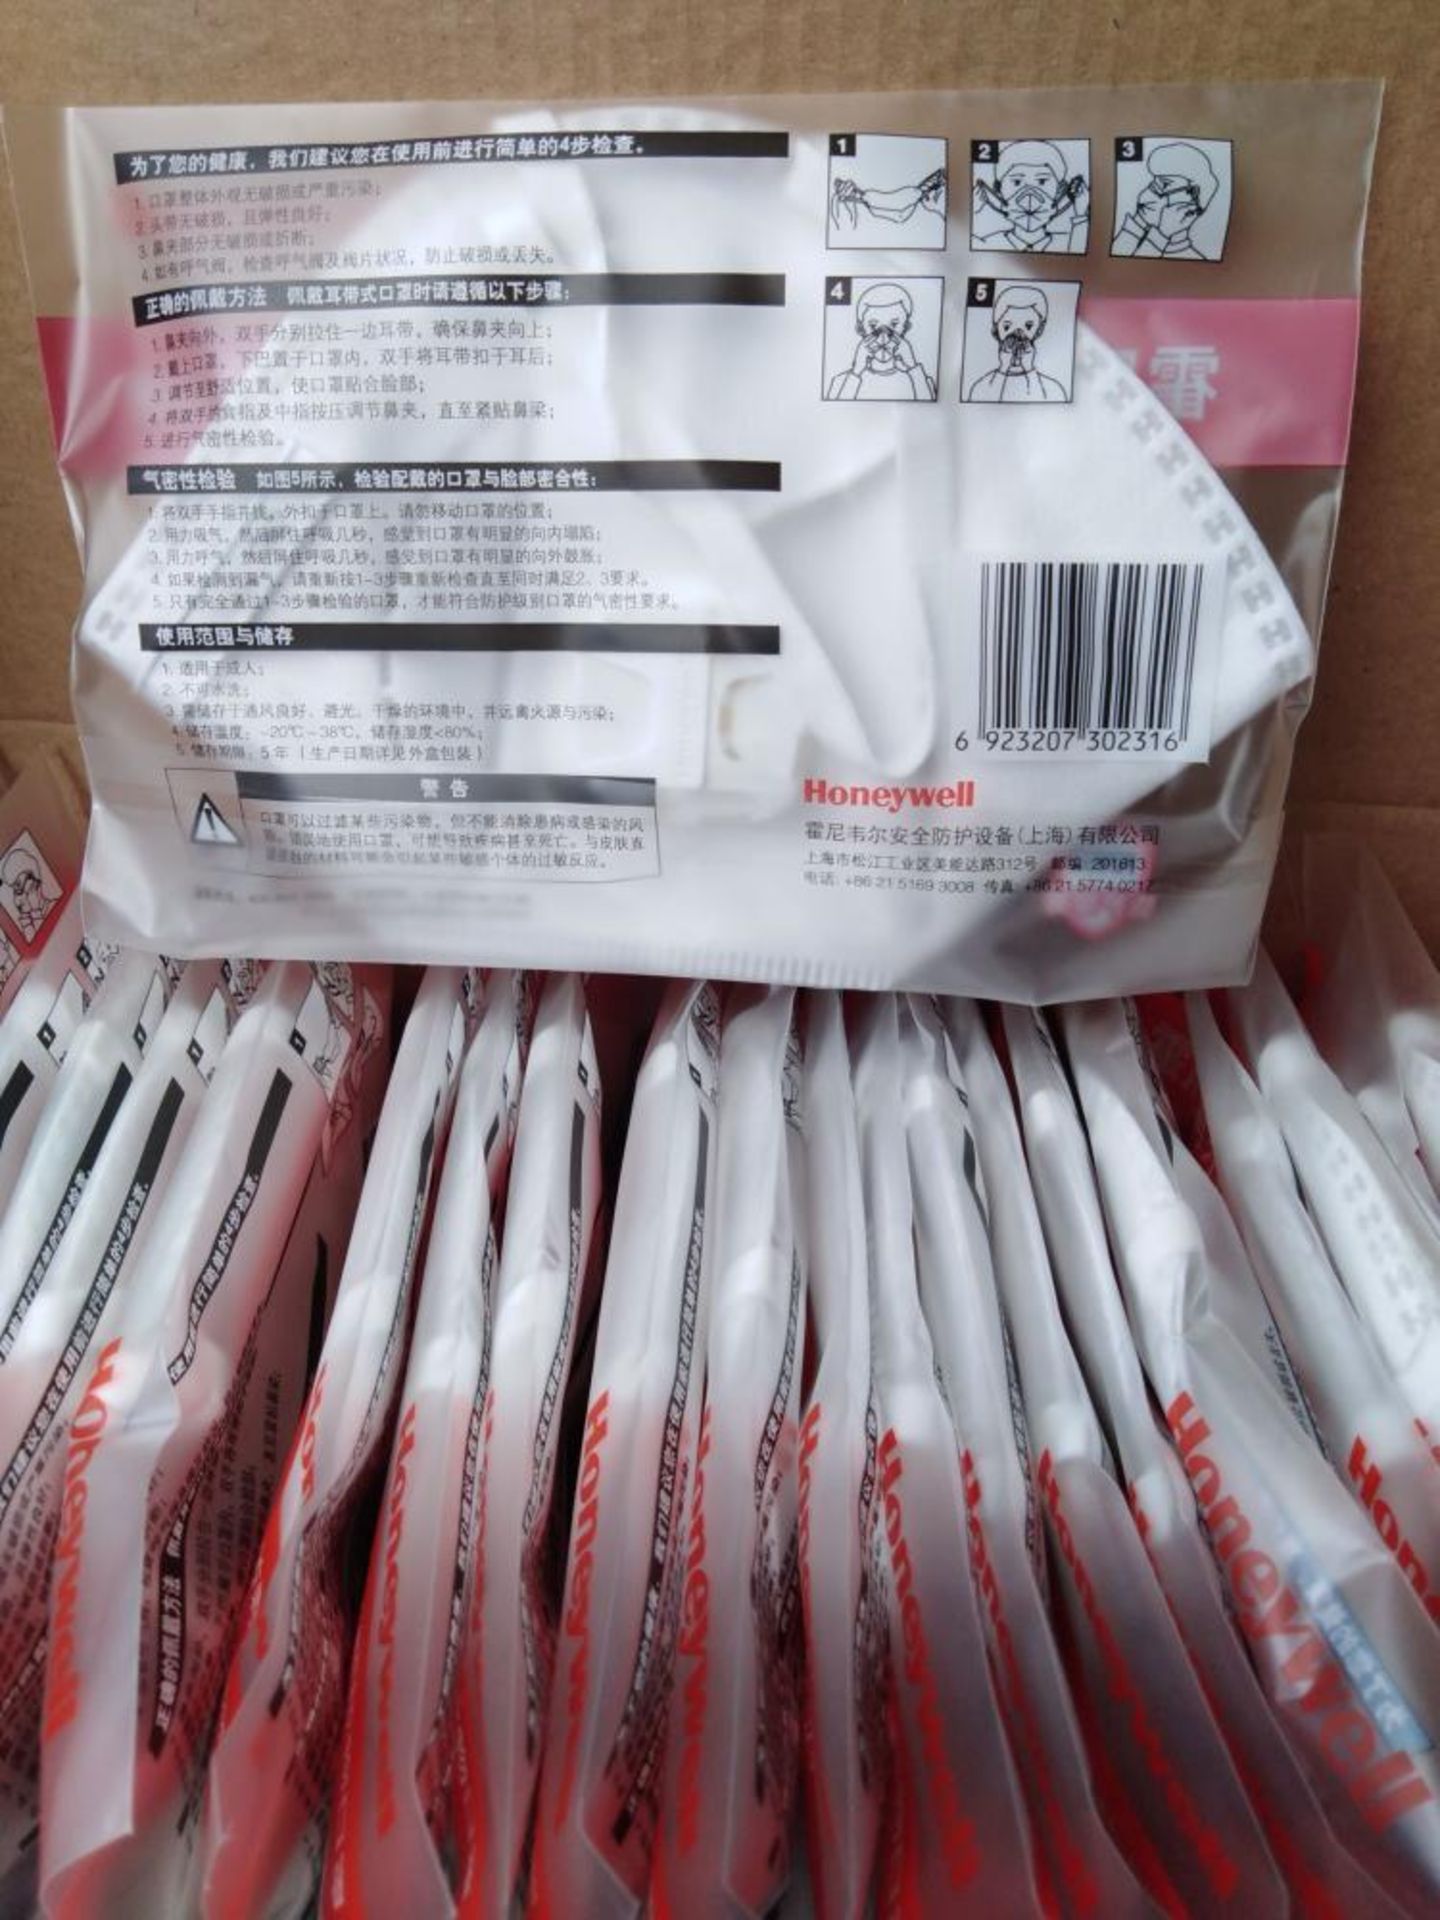 1000x Honeywell H950V Protective face mask with valve 25 per box, 20 boxes per carton. - Image 4 of 4